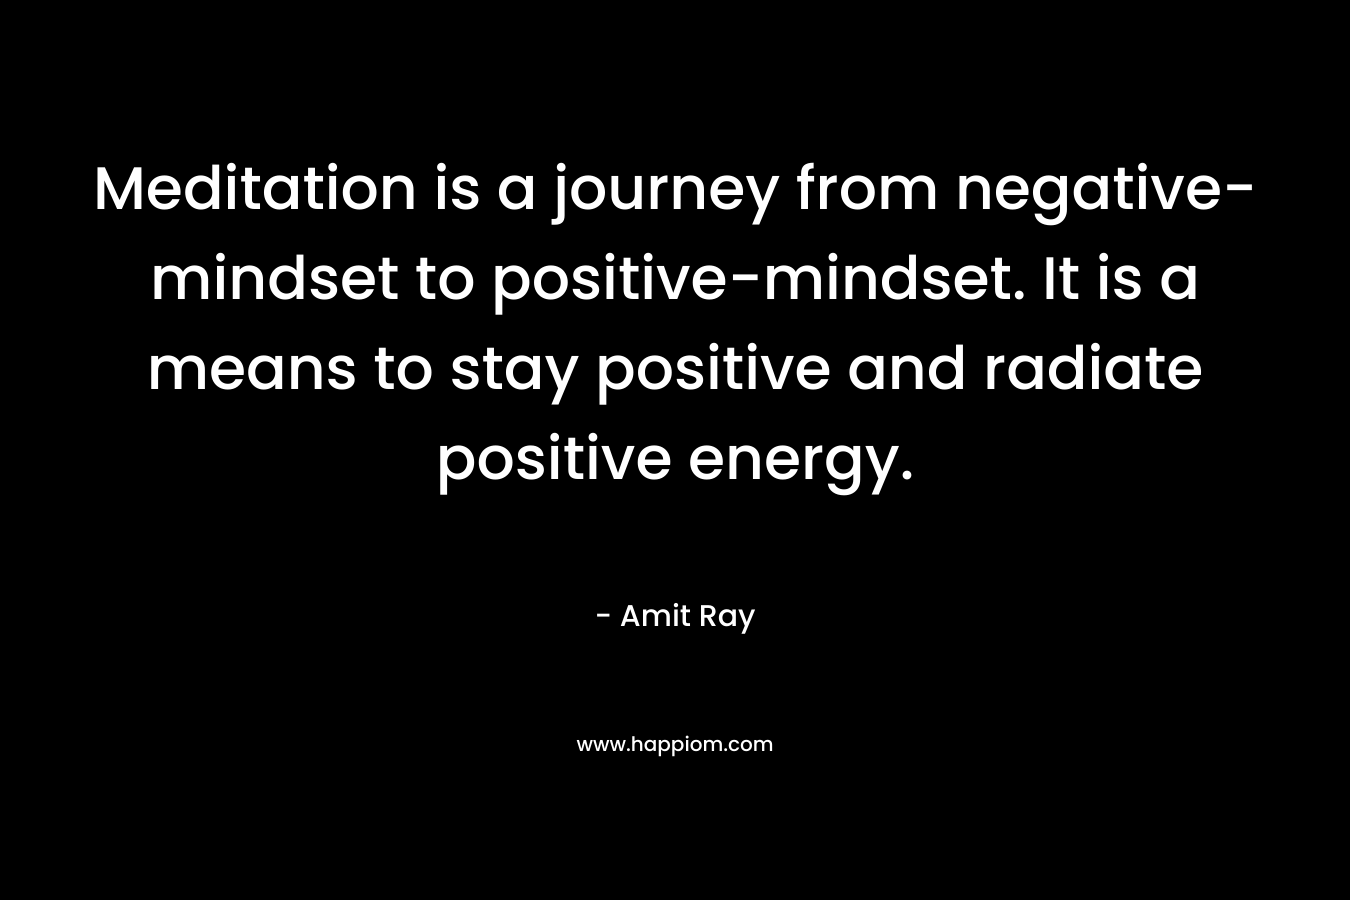 Meditation is a journey from negative-mindset to positive-mindset. It is a means to stay positive and radiate positive energy.